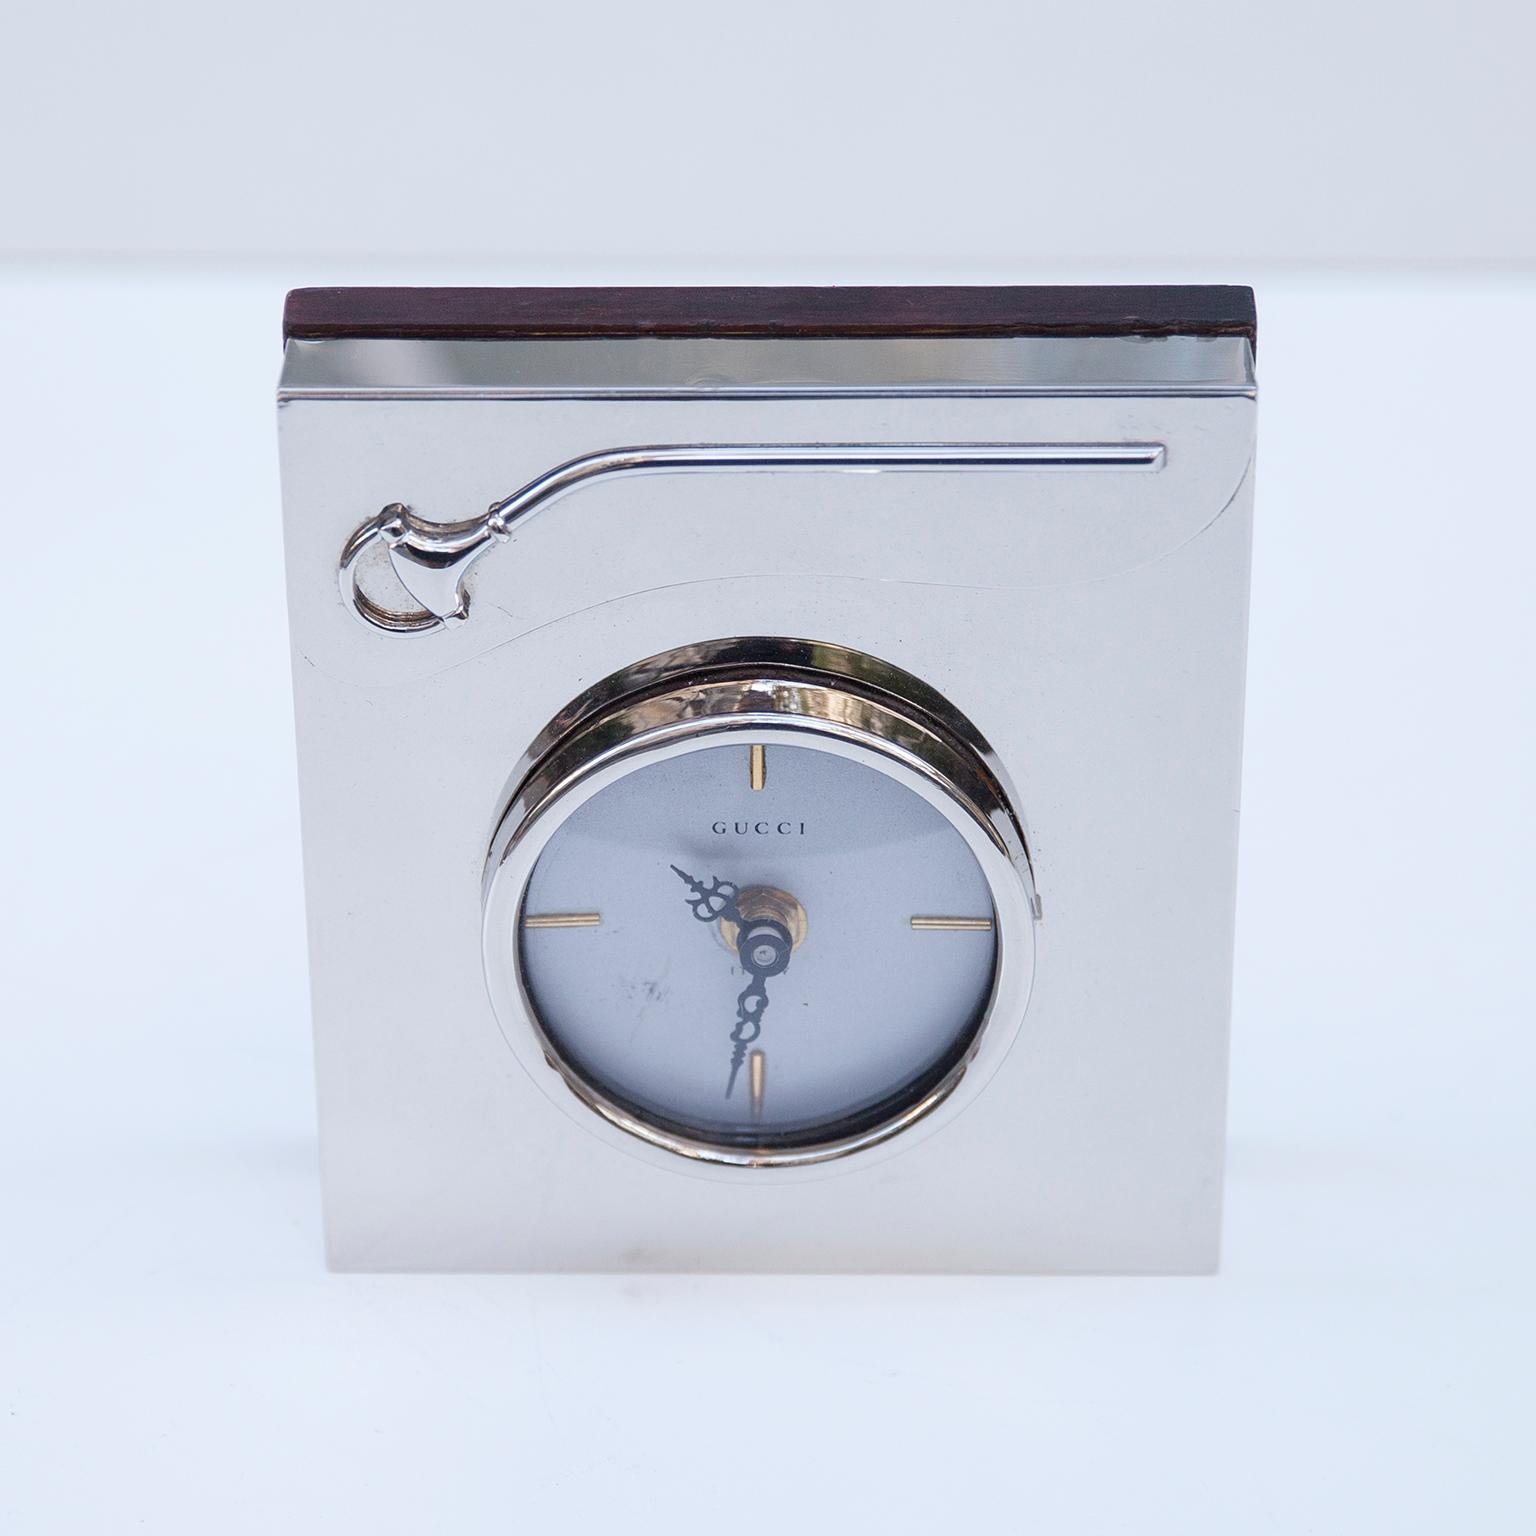 Elegant vintage Gucci table clock made in chrome and wood, marked with Gucci and the Gucci famous stirrup holder.
 
 